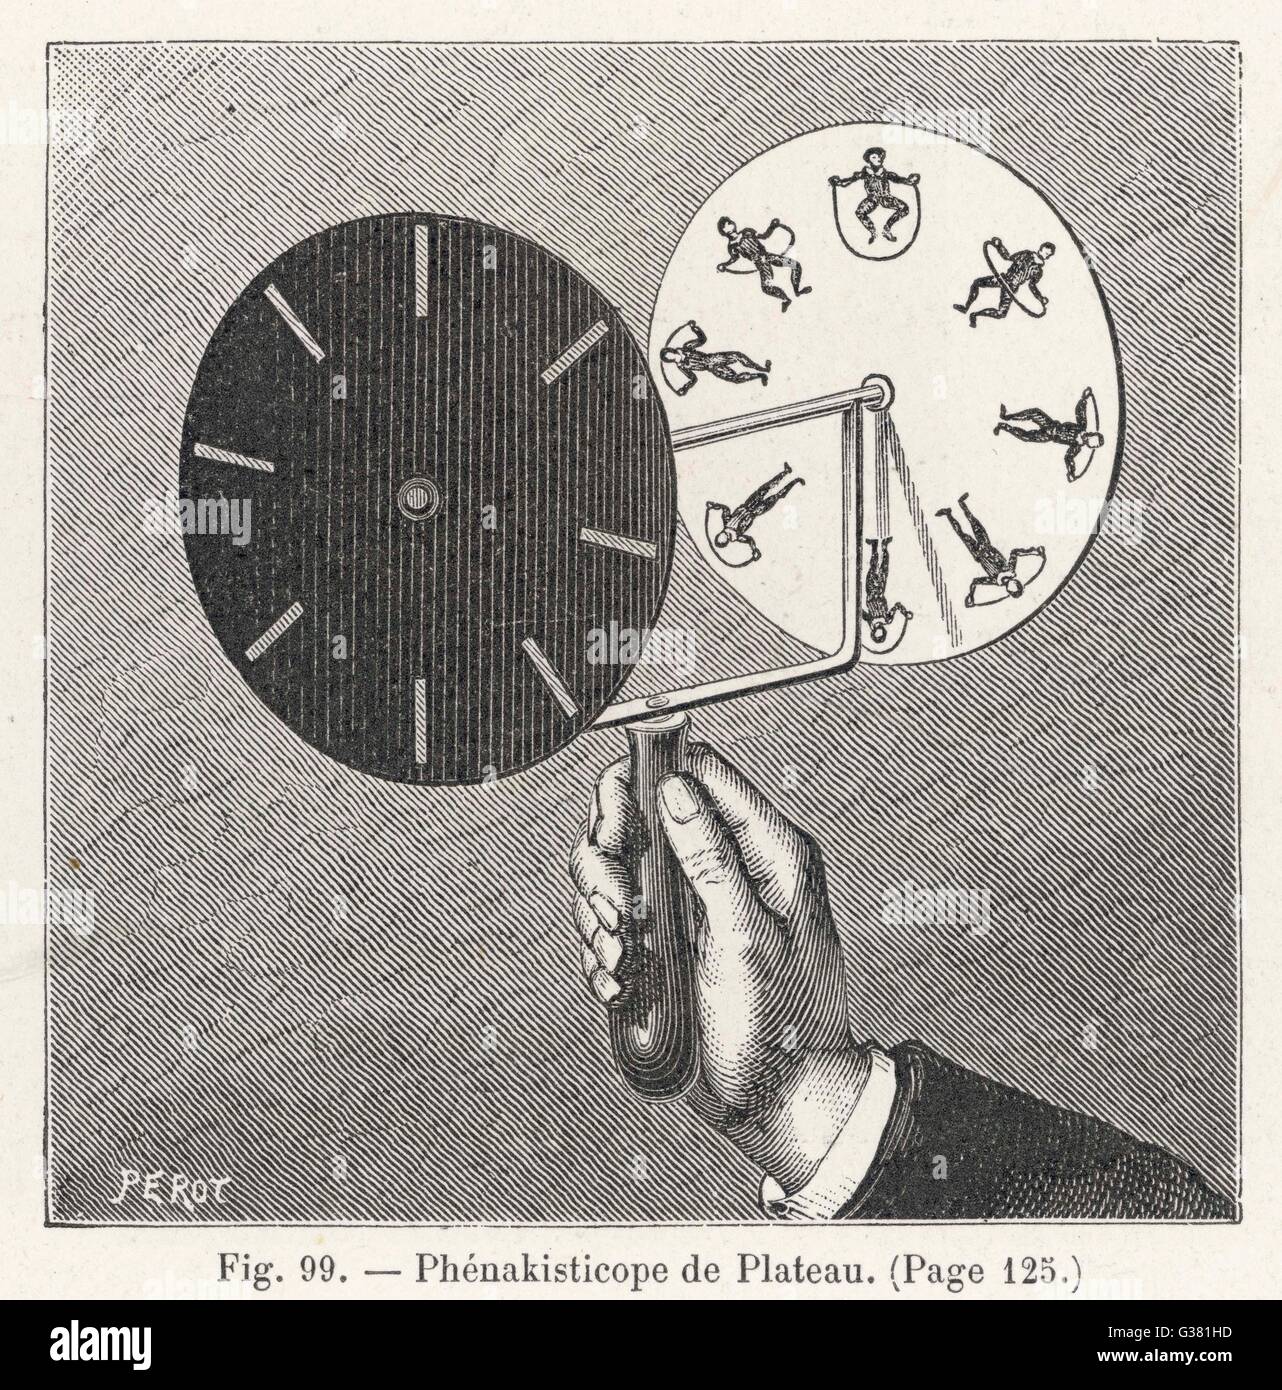 Plateau's Phenakistoscope - a variant of the zootrope,  in which the images, seen  through slits, seem to move  when the disc is rotated.      Date: 1885 Stock Photo